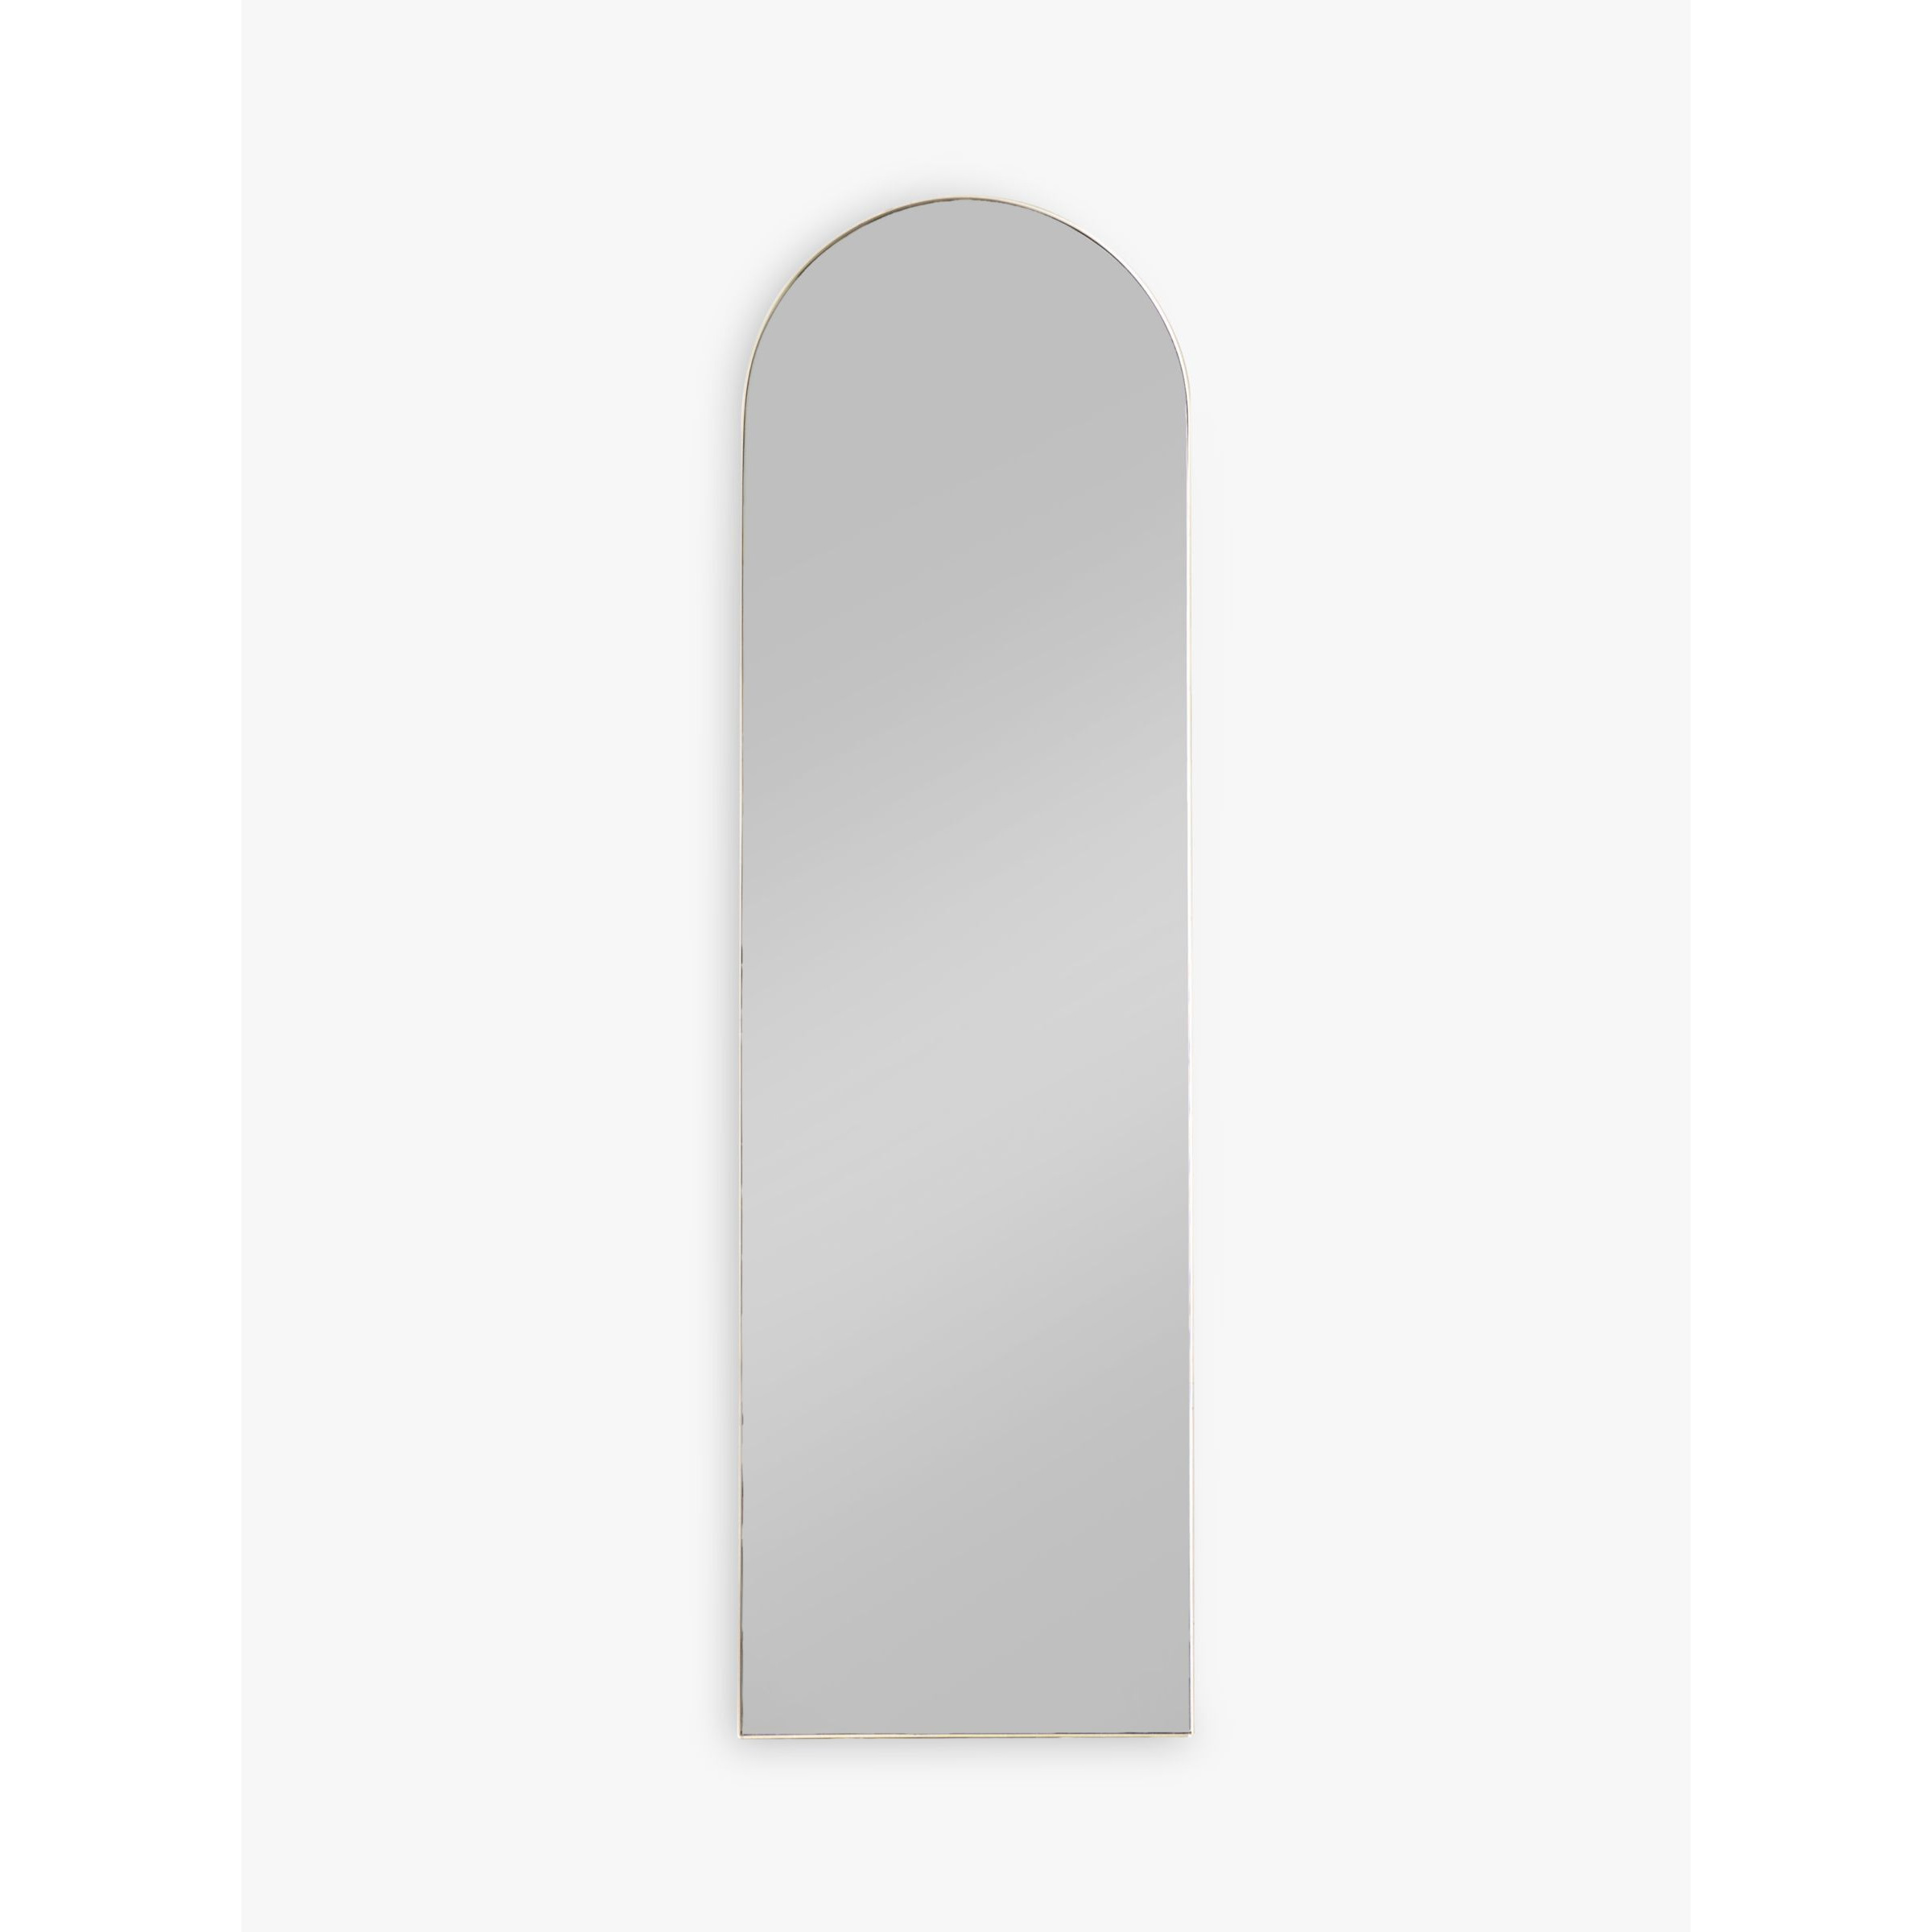 Hurston Arched Metal Frame Full-Length Wall Mirror, 170 x 50cm - image 1